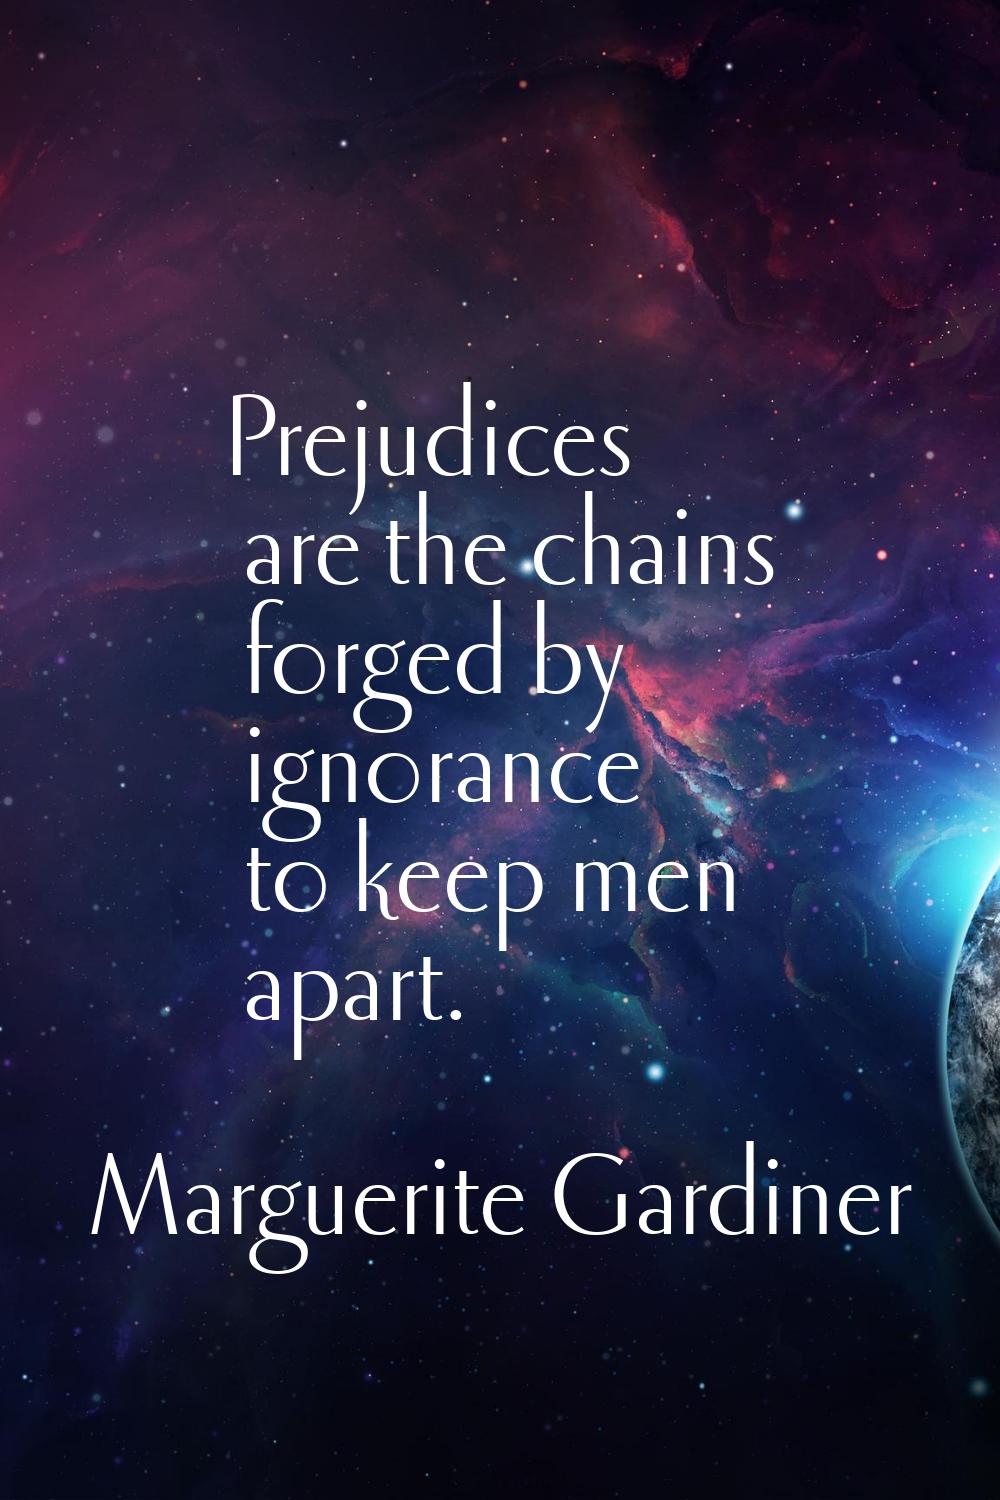 Prejudices are the chains forged by ignorance to keep men apart.